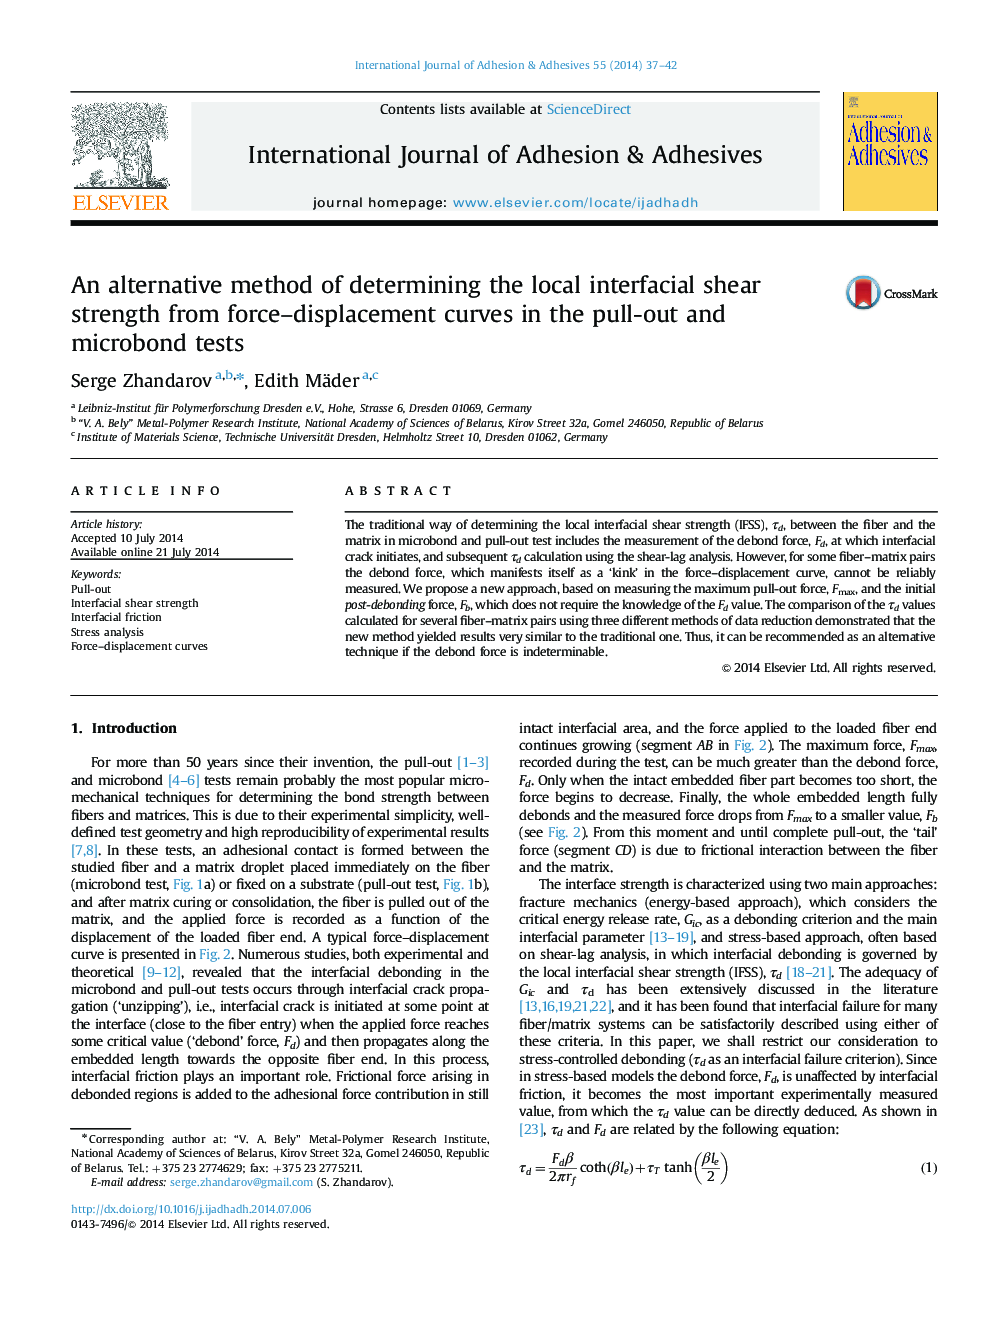 An alternative method of determining the local interfacial shear strength from force–displacement curves in the pull-out and microbond tests